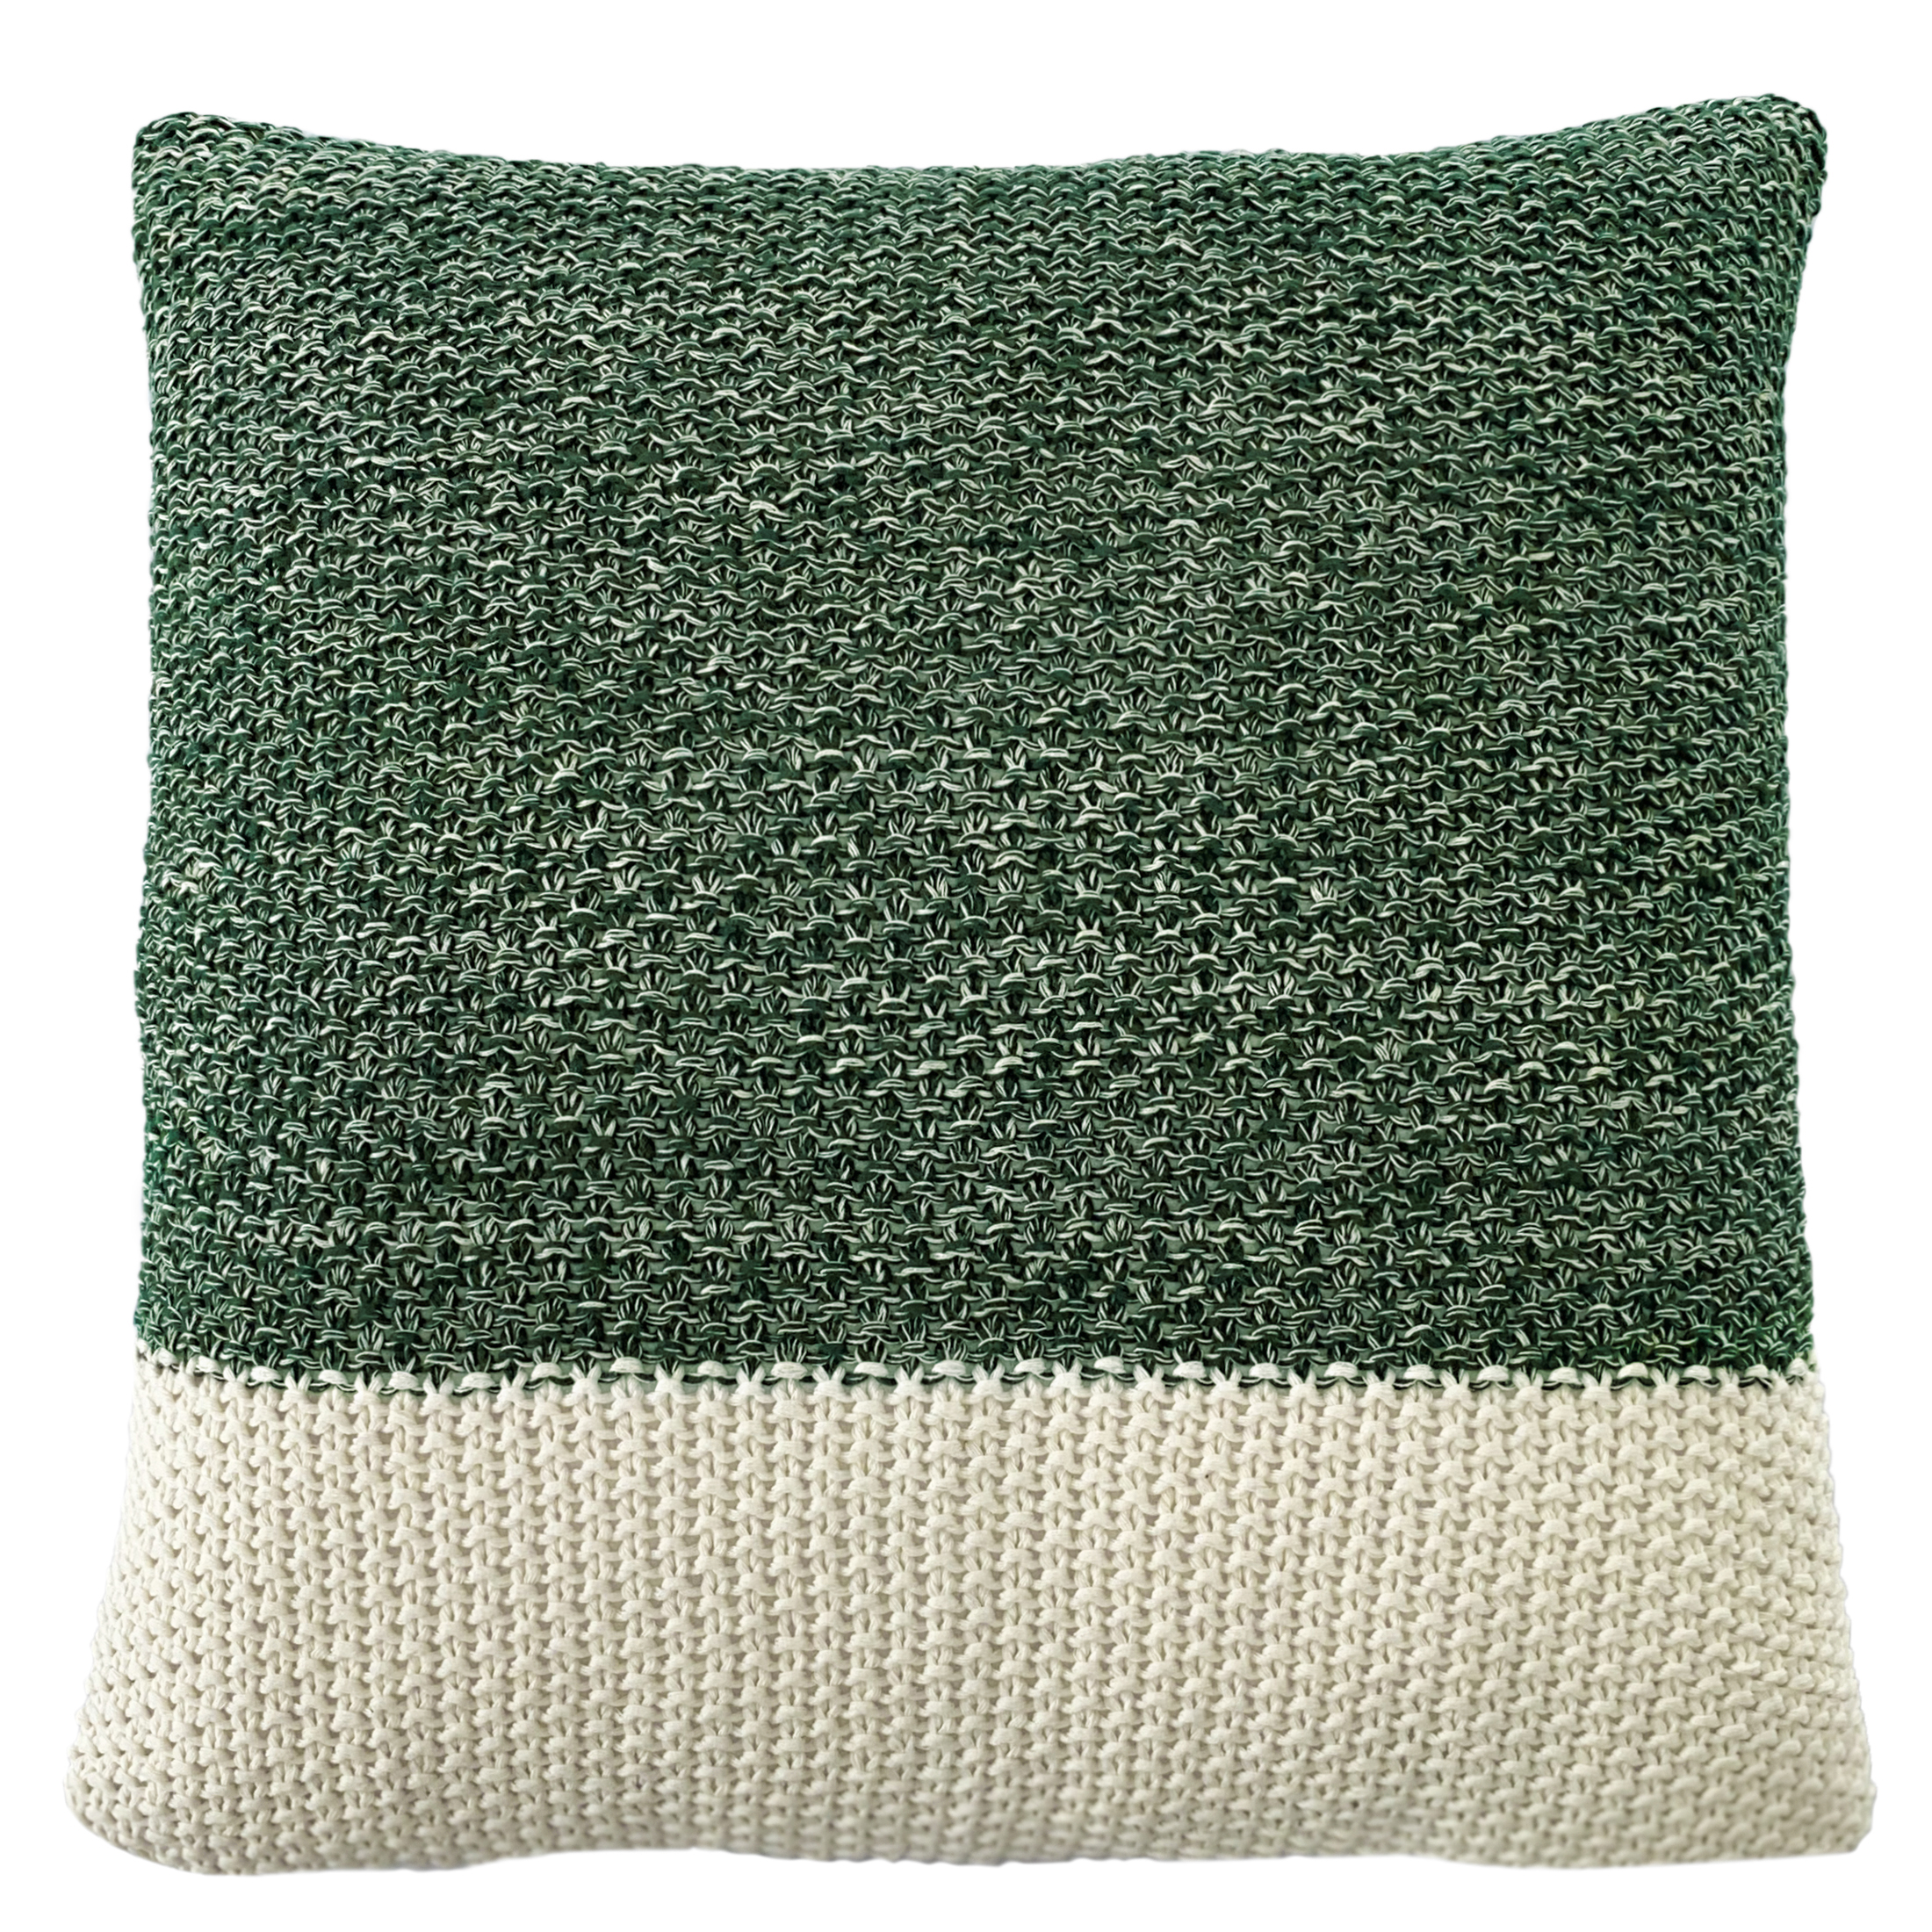 My Texas House Cassia Sweater Knit Square Decorative Pillow Cover, 18" x 18", Green - image 1 of 5